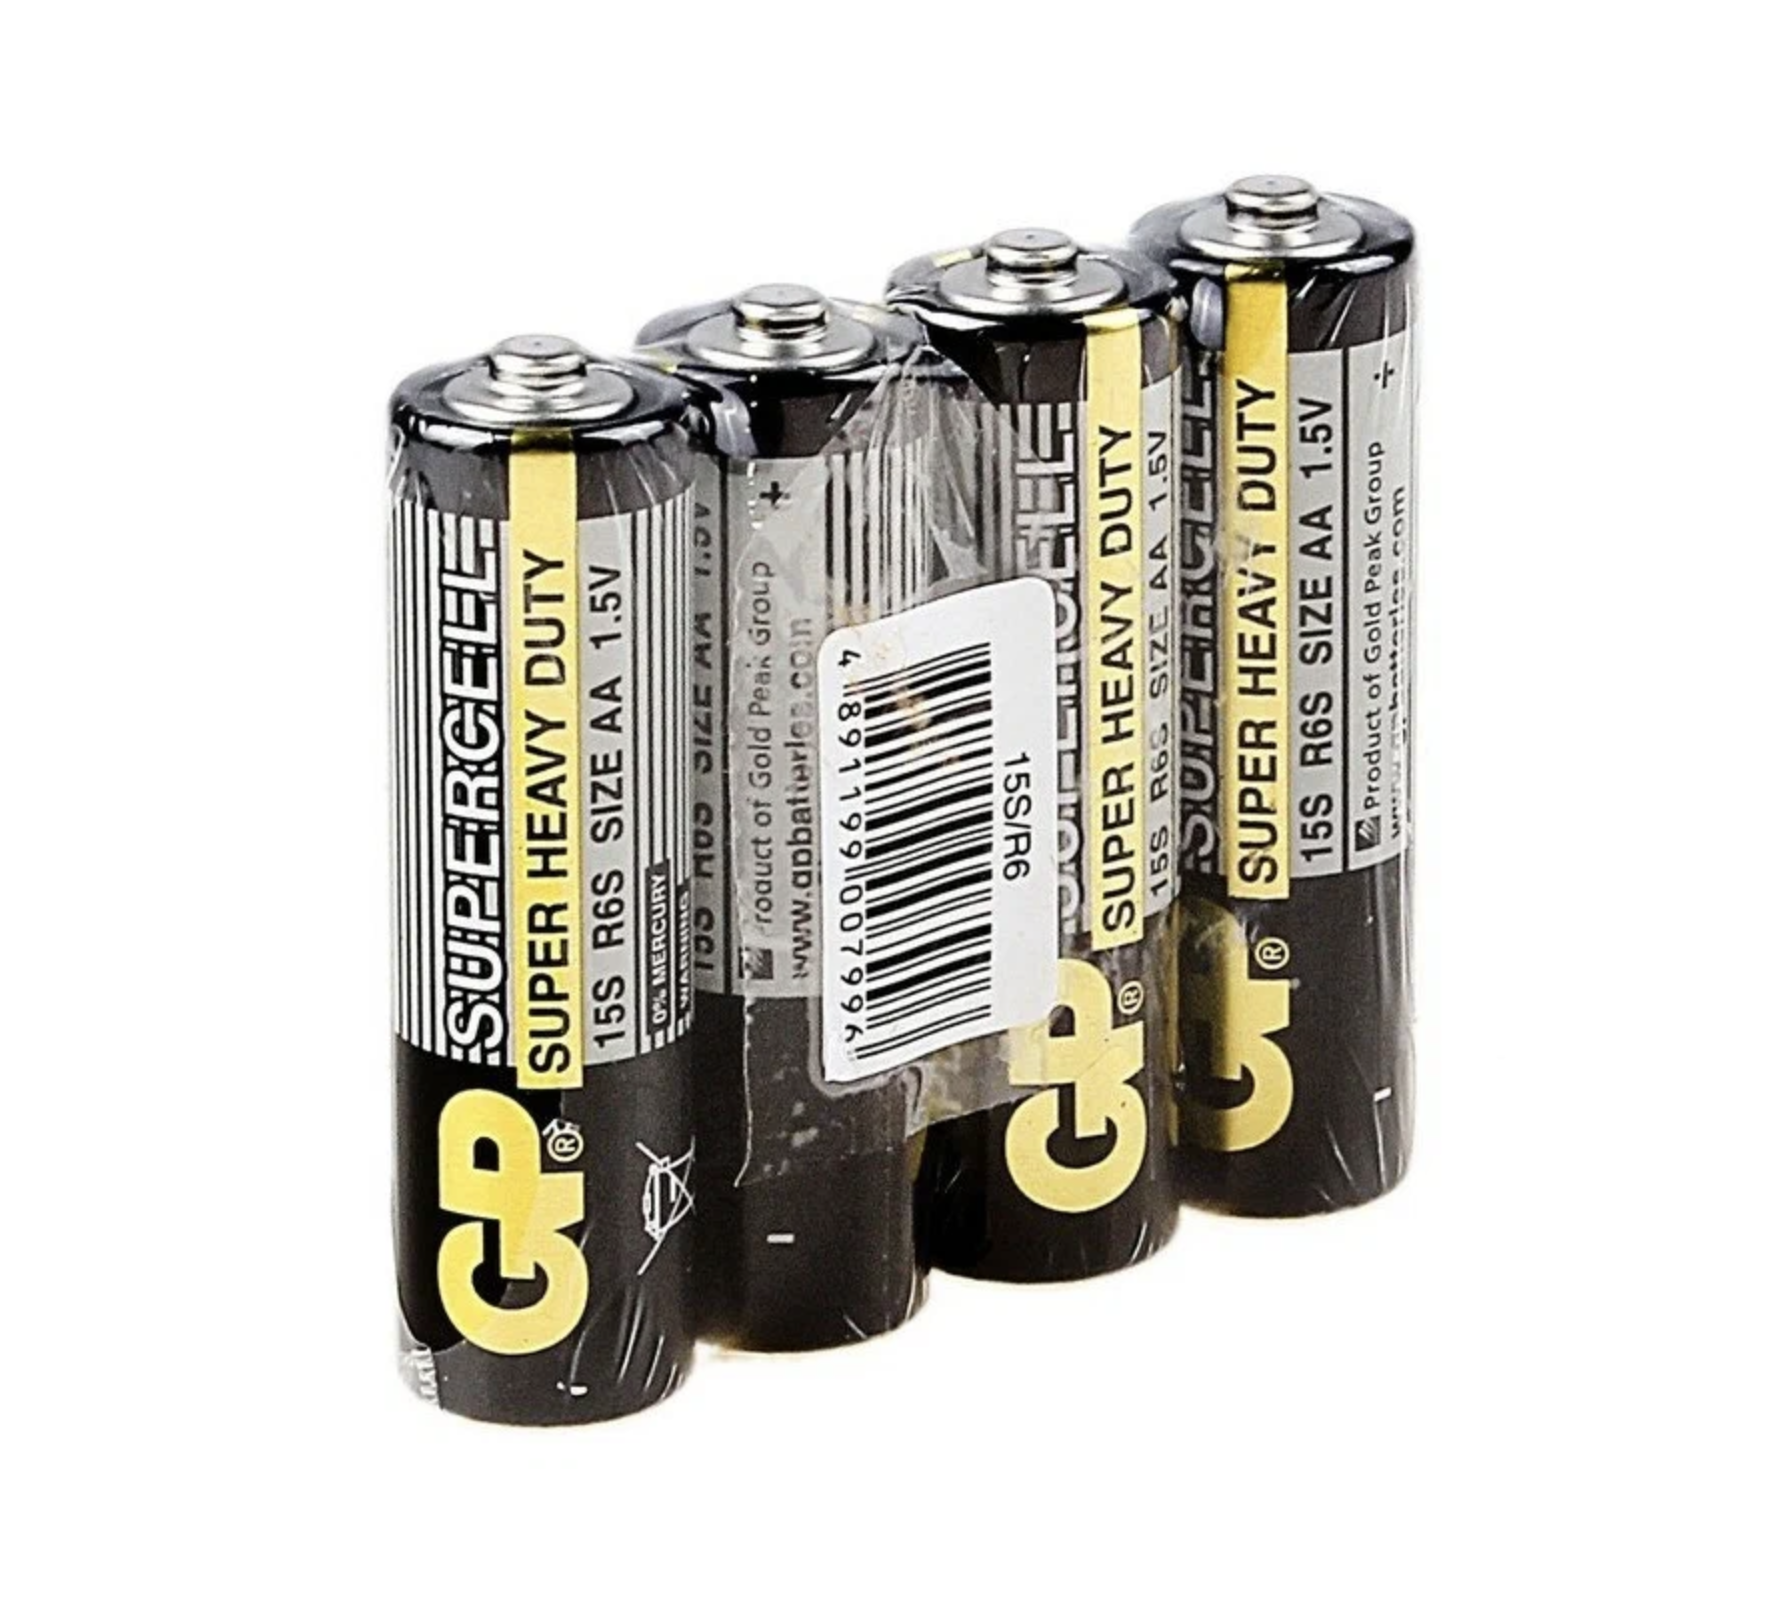  GP -  Supercell Super Heavy Duty 15PL R6P Size AA 1,5V 4 